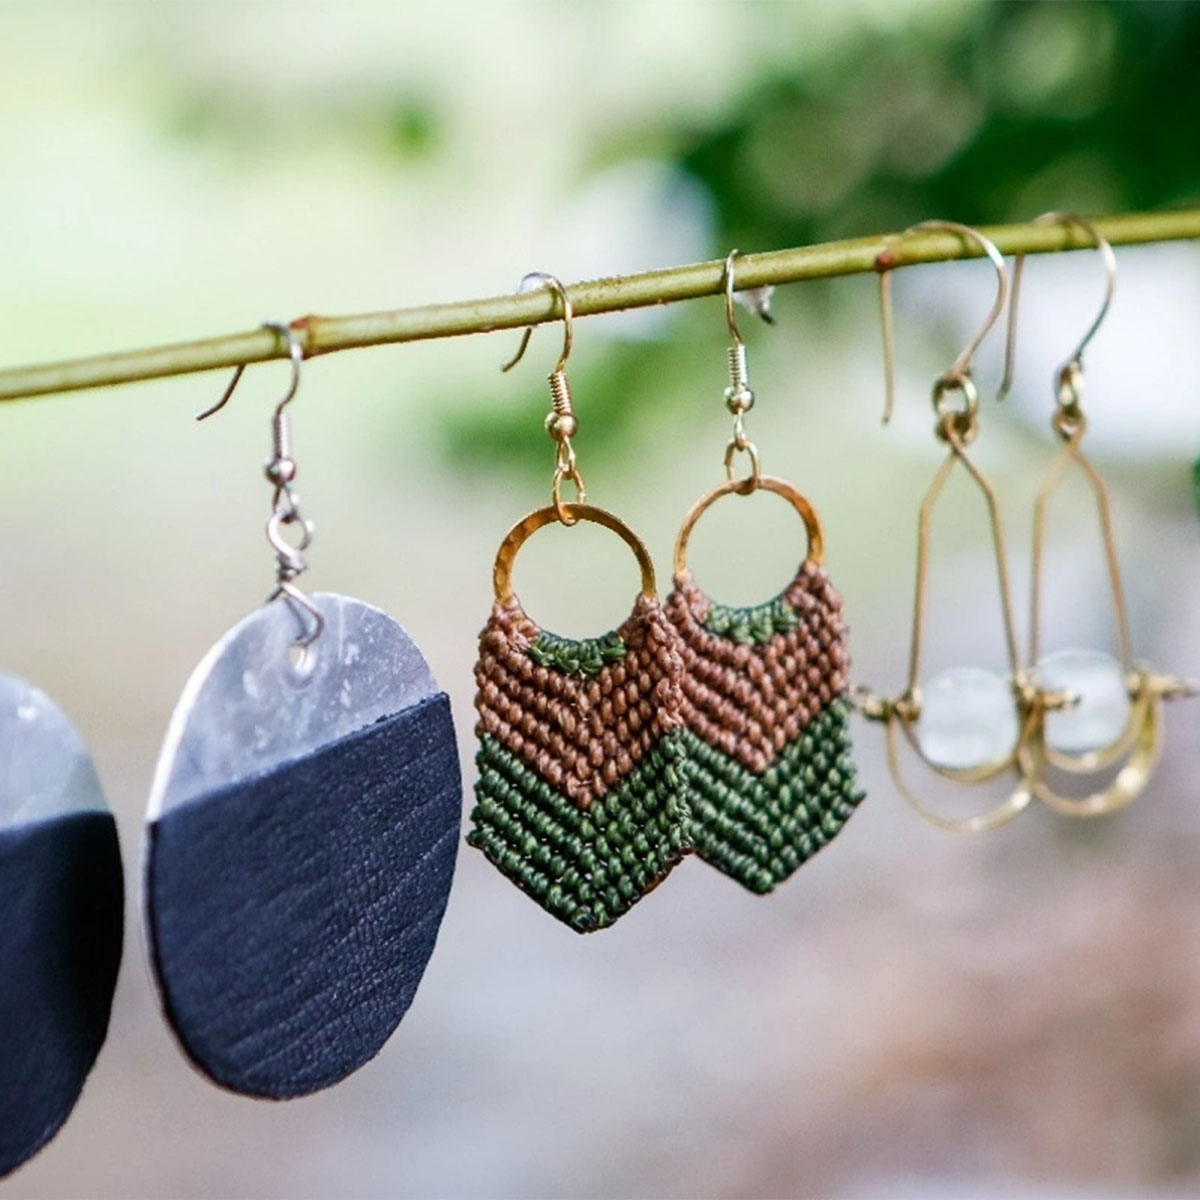 Fair Trade Friday Earring of the Month